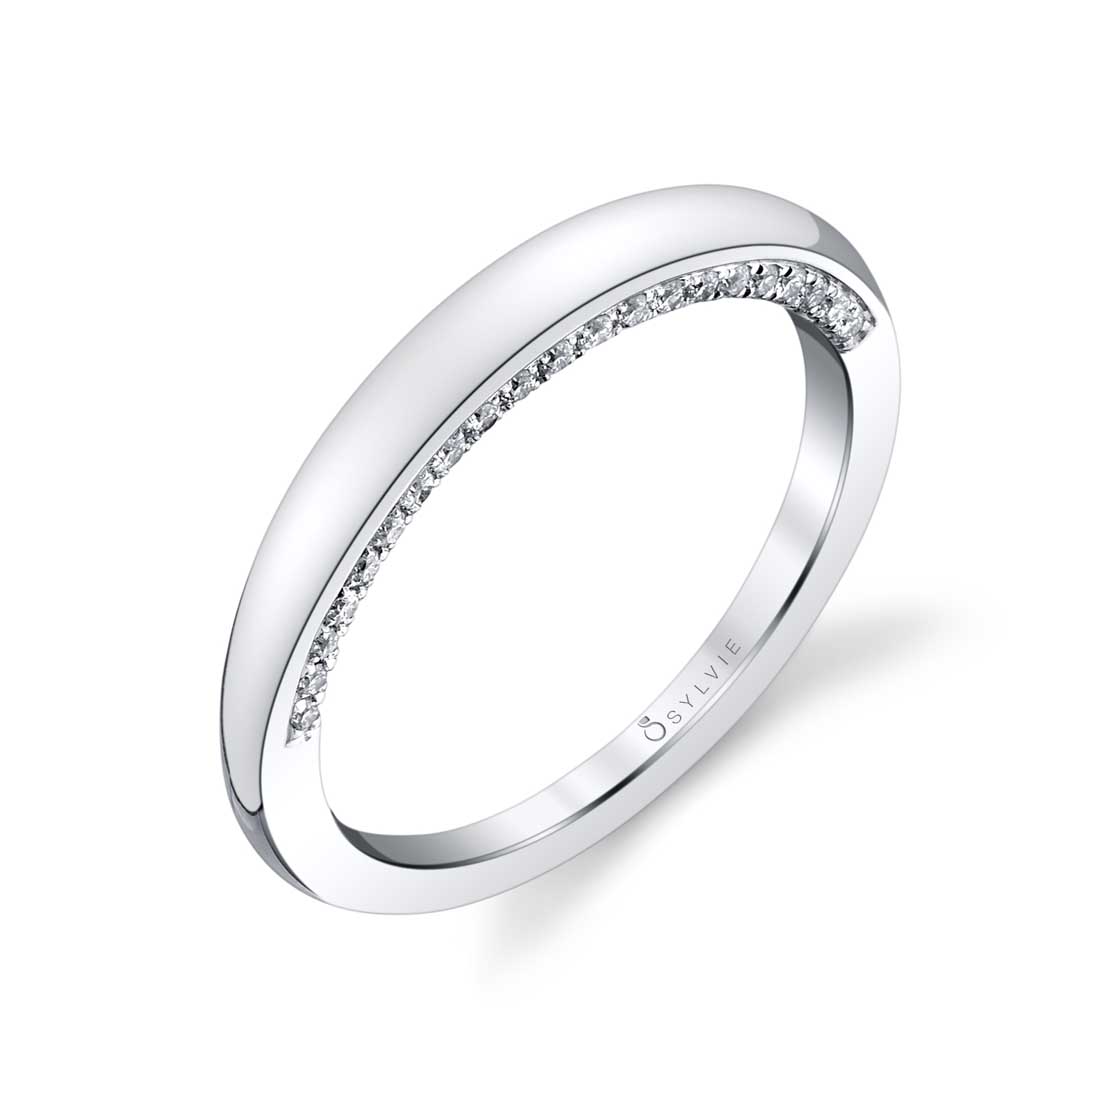 Profile Image of a Solitaire Engagement Ring